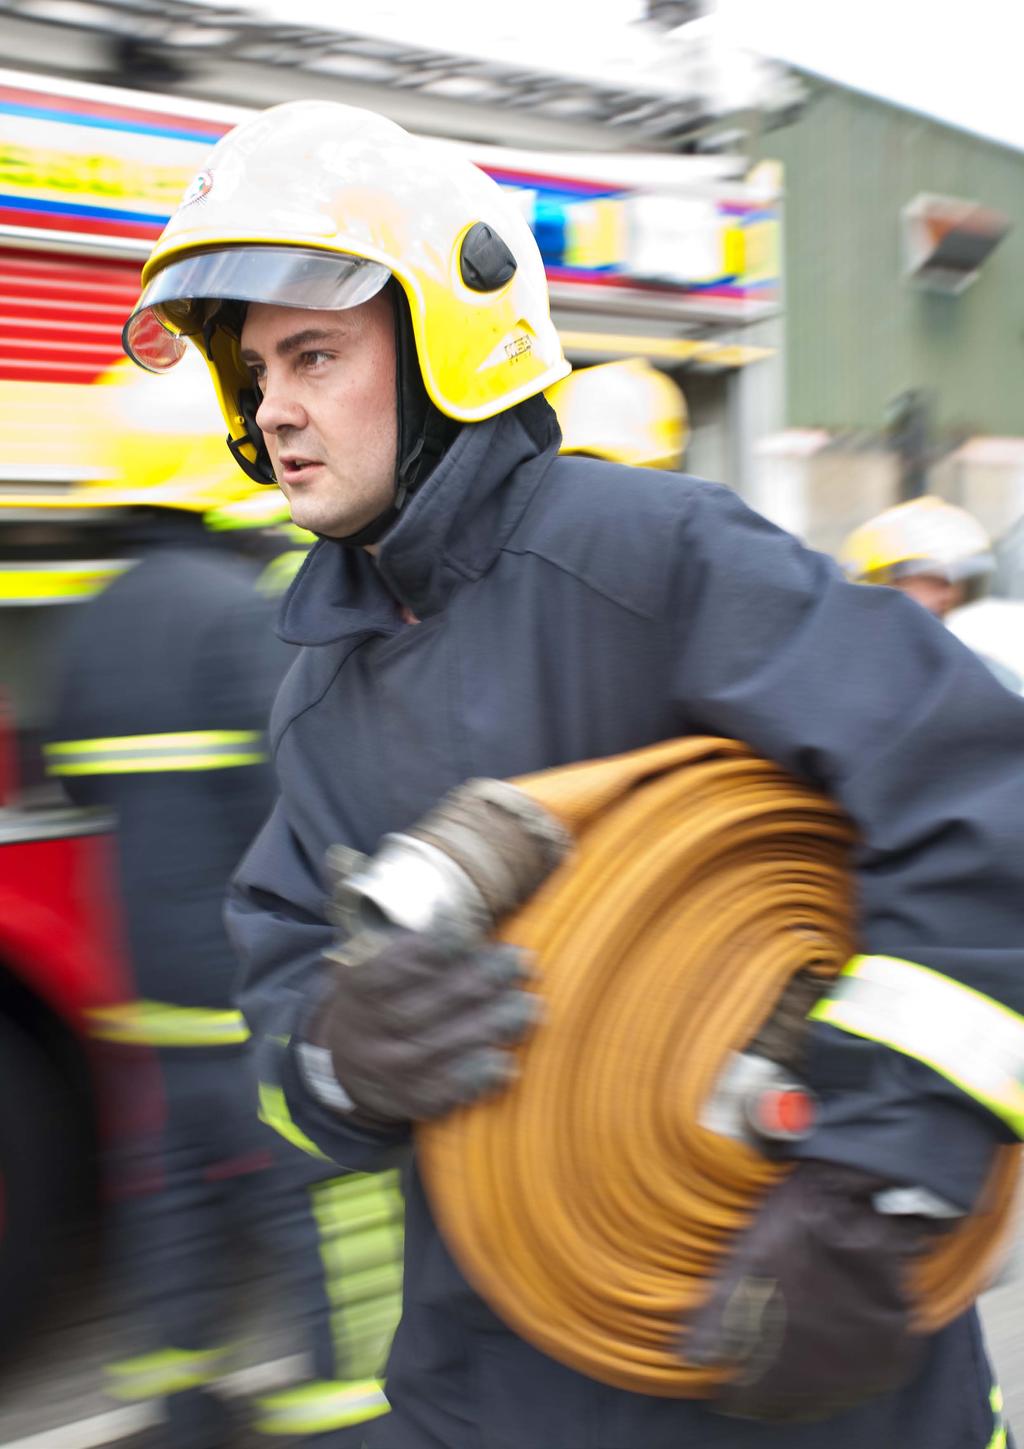 Technical Fire Safety technology has improved hugely in recent years.